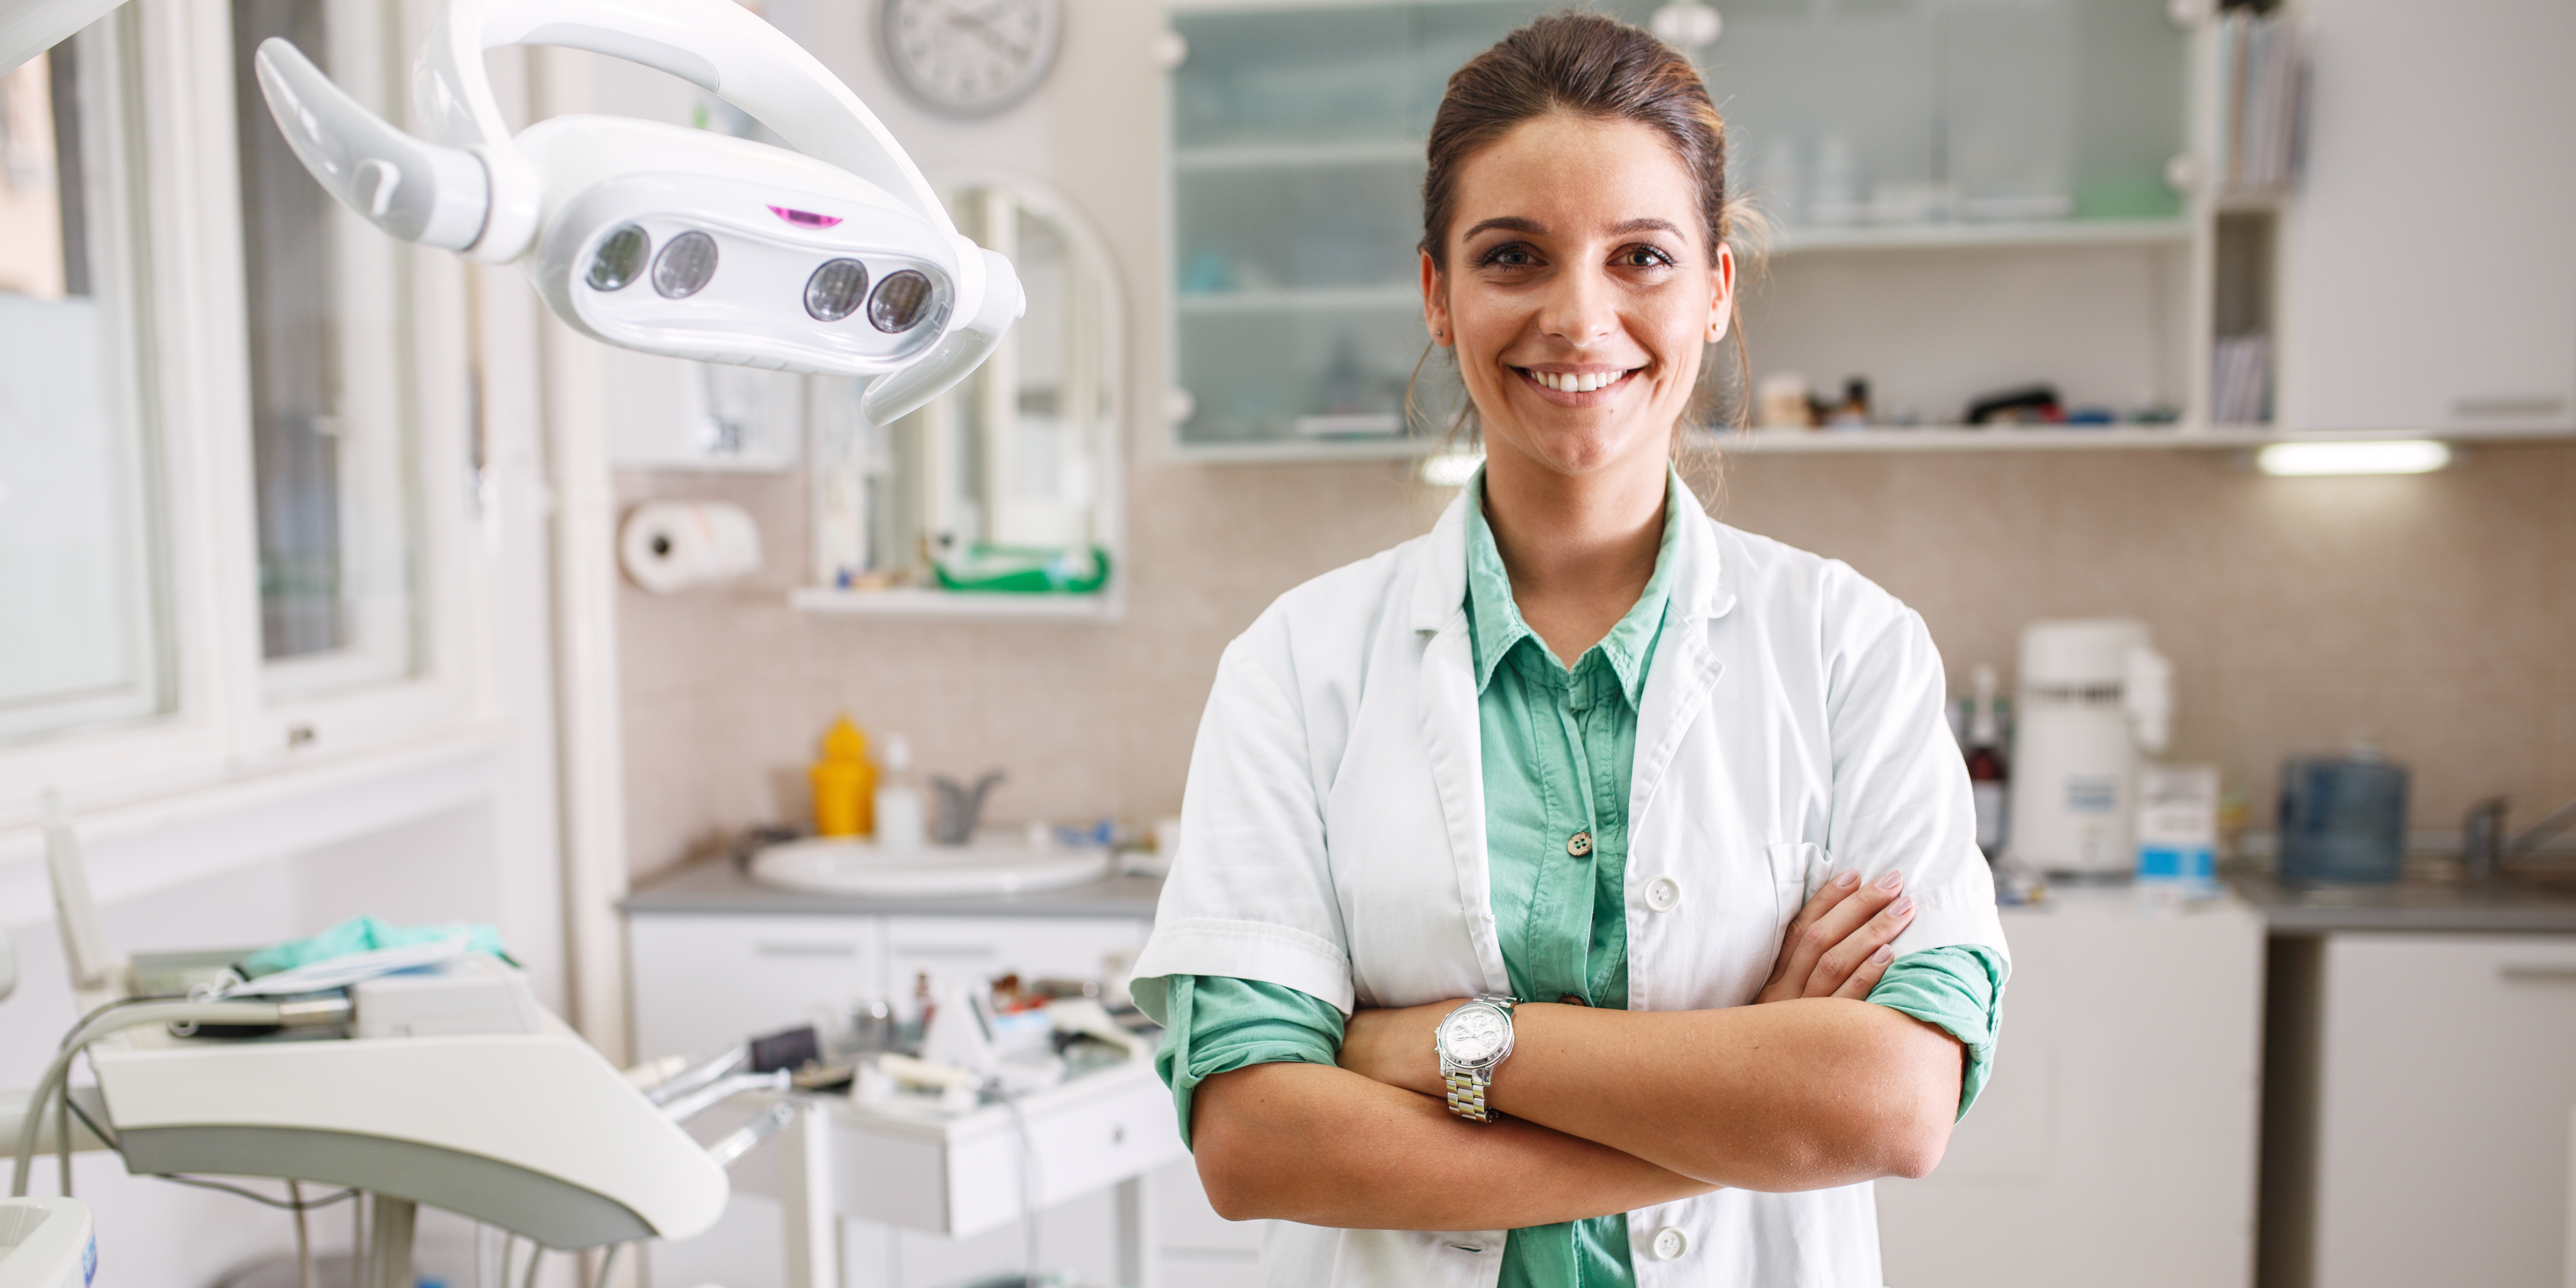 Dentist standing in front of equipment